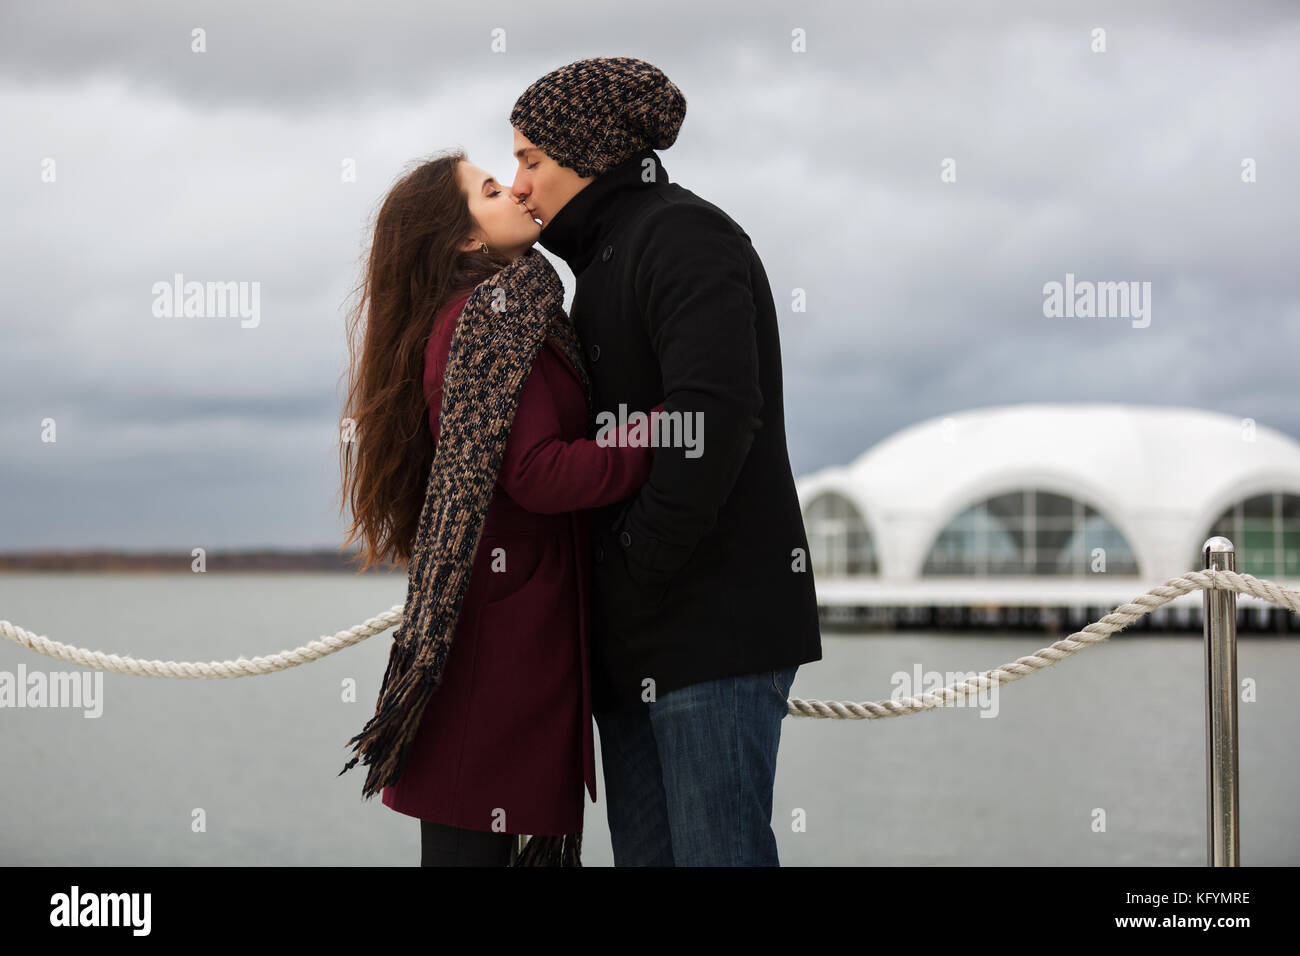 Felice coppia giovane in amore kissing outdoor Foto Stock